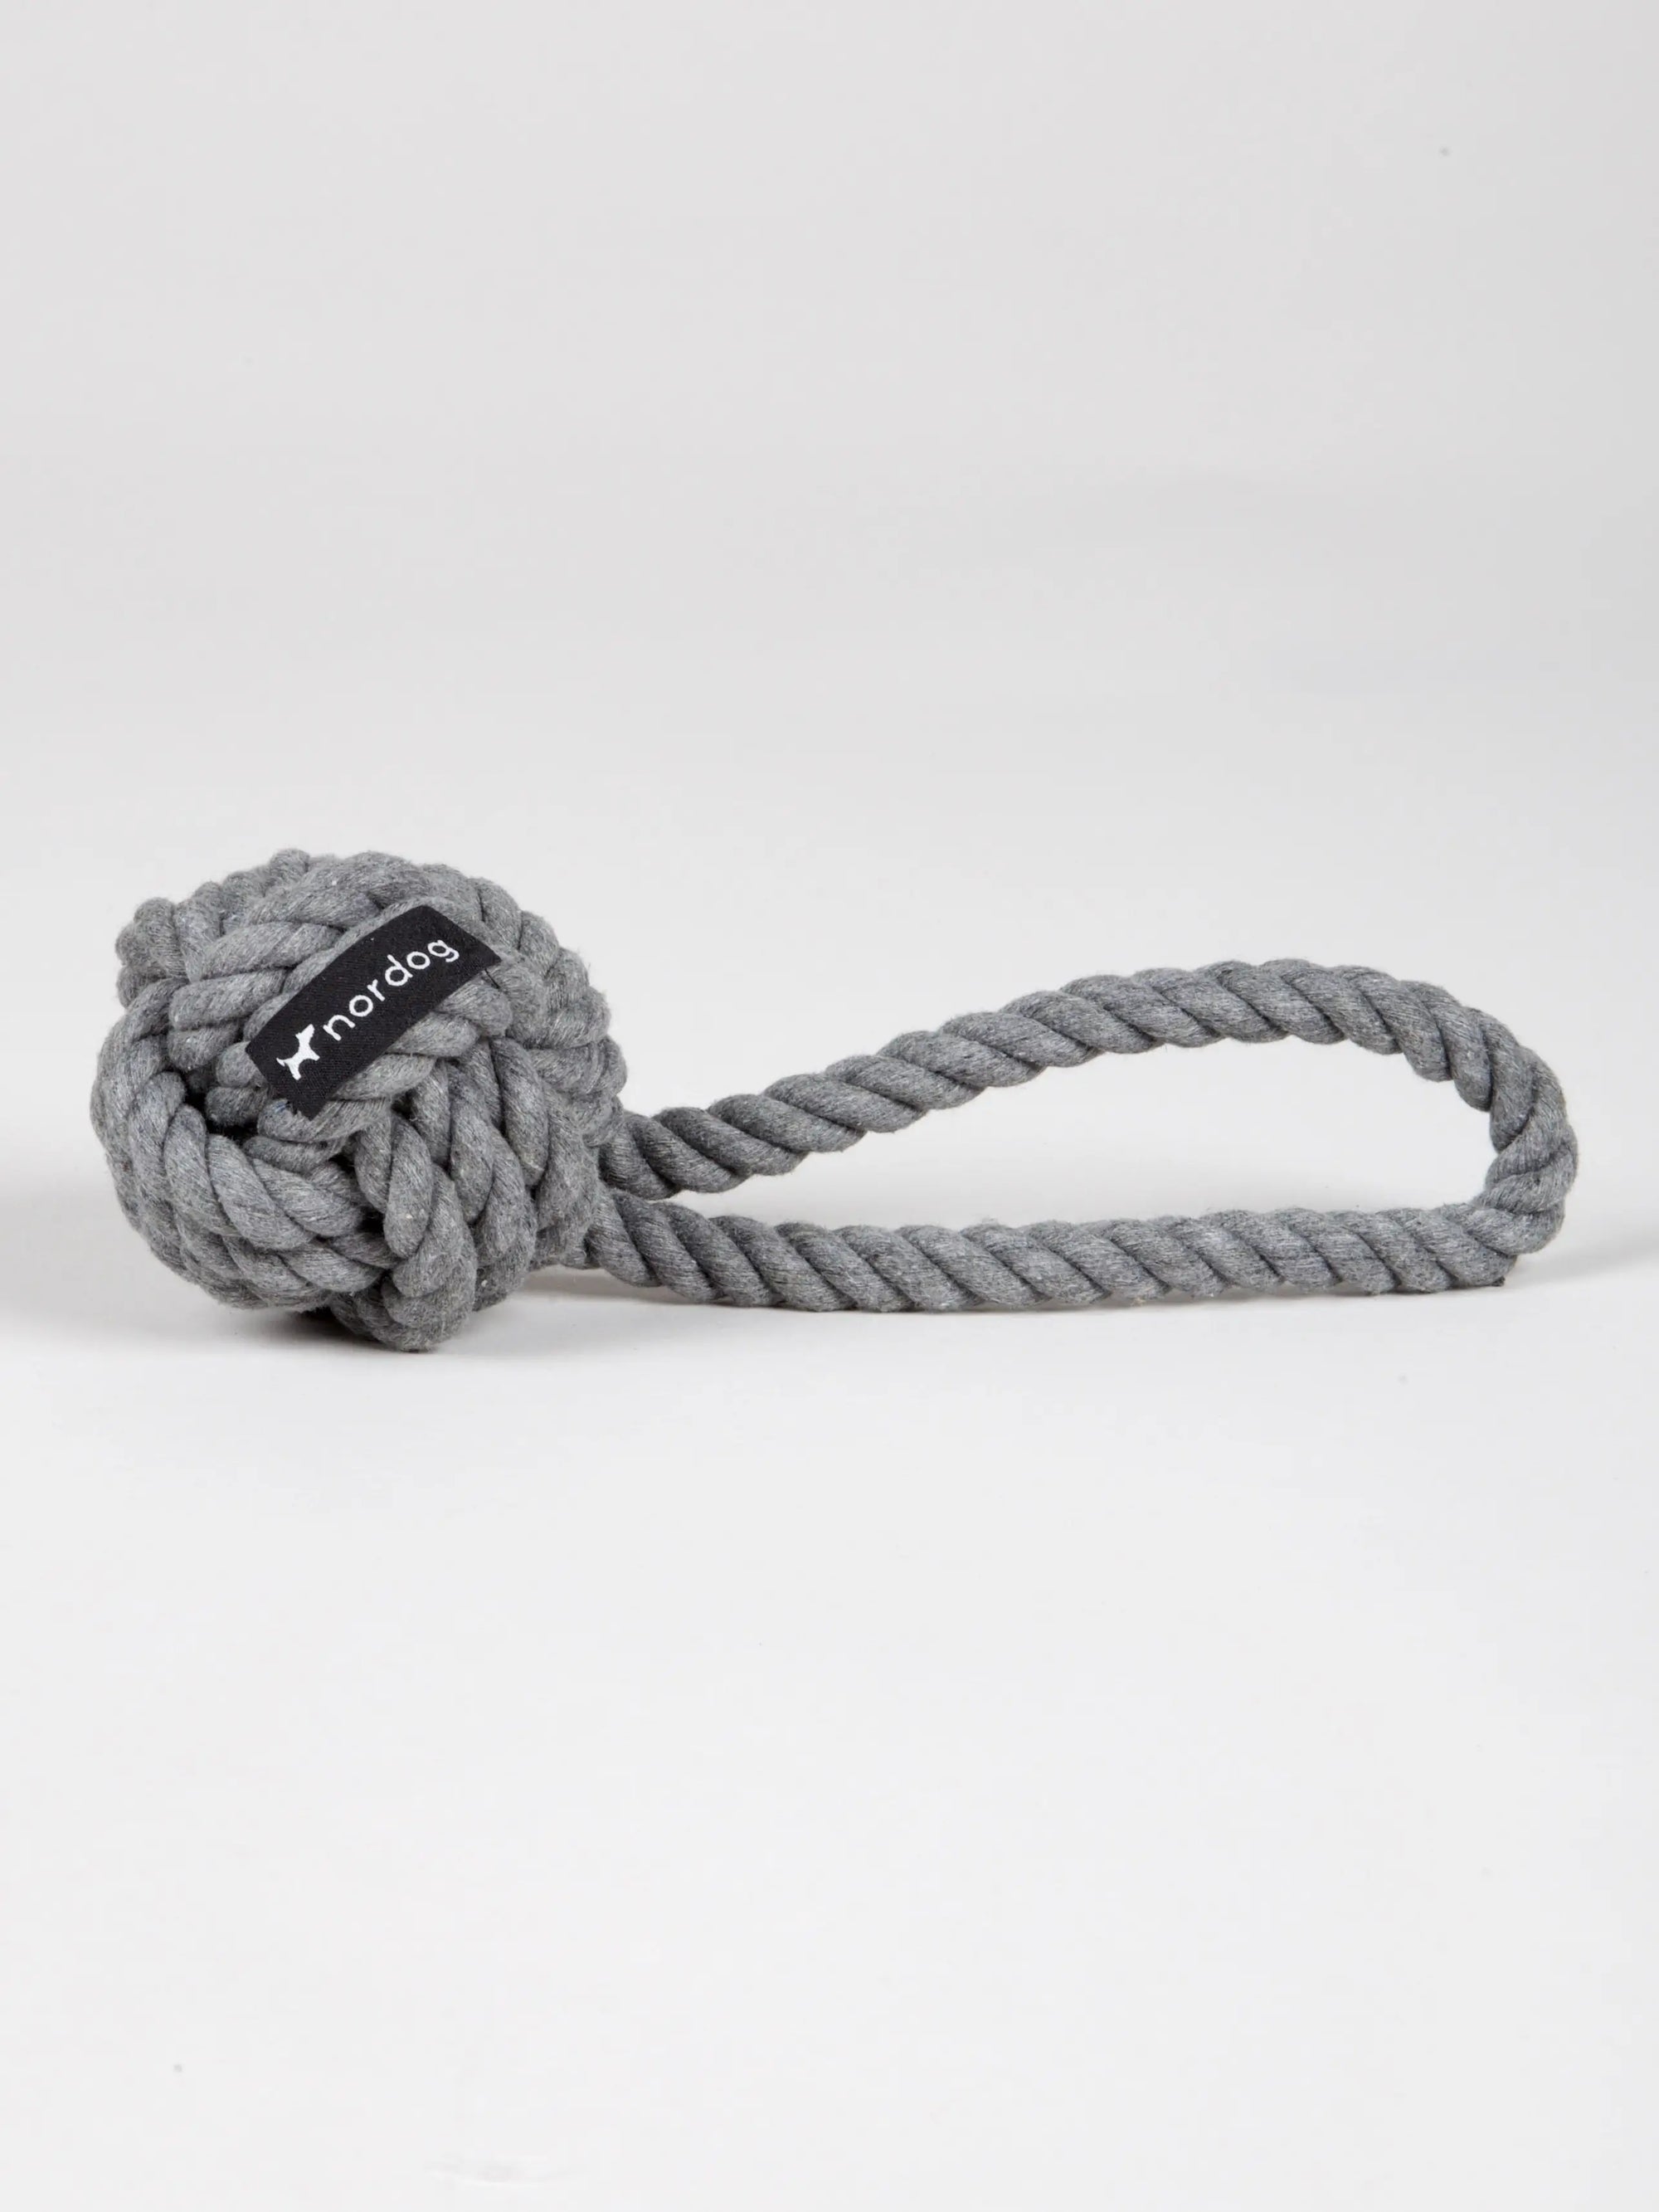 Grey Rope Toy